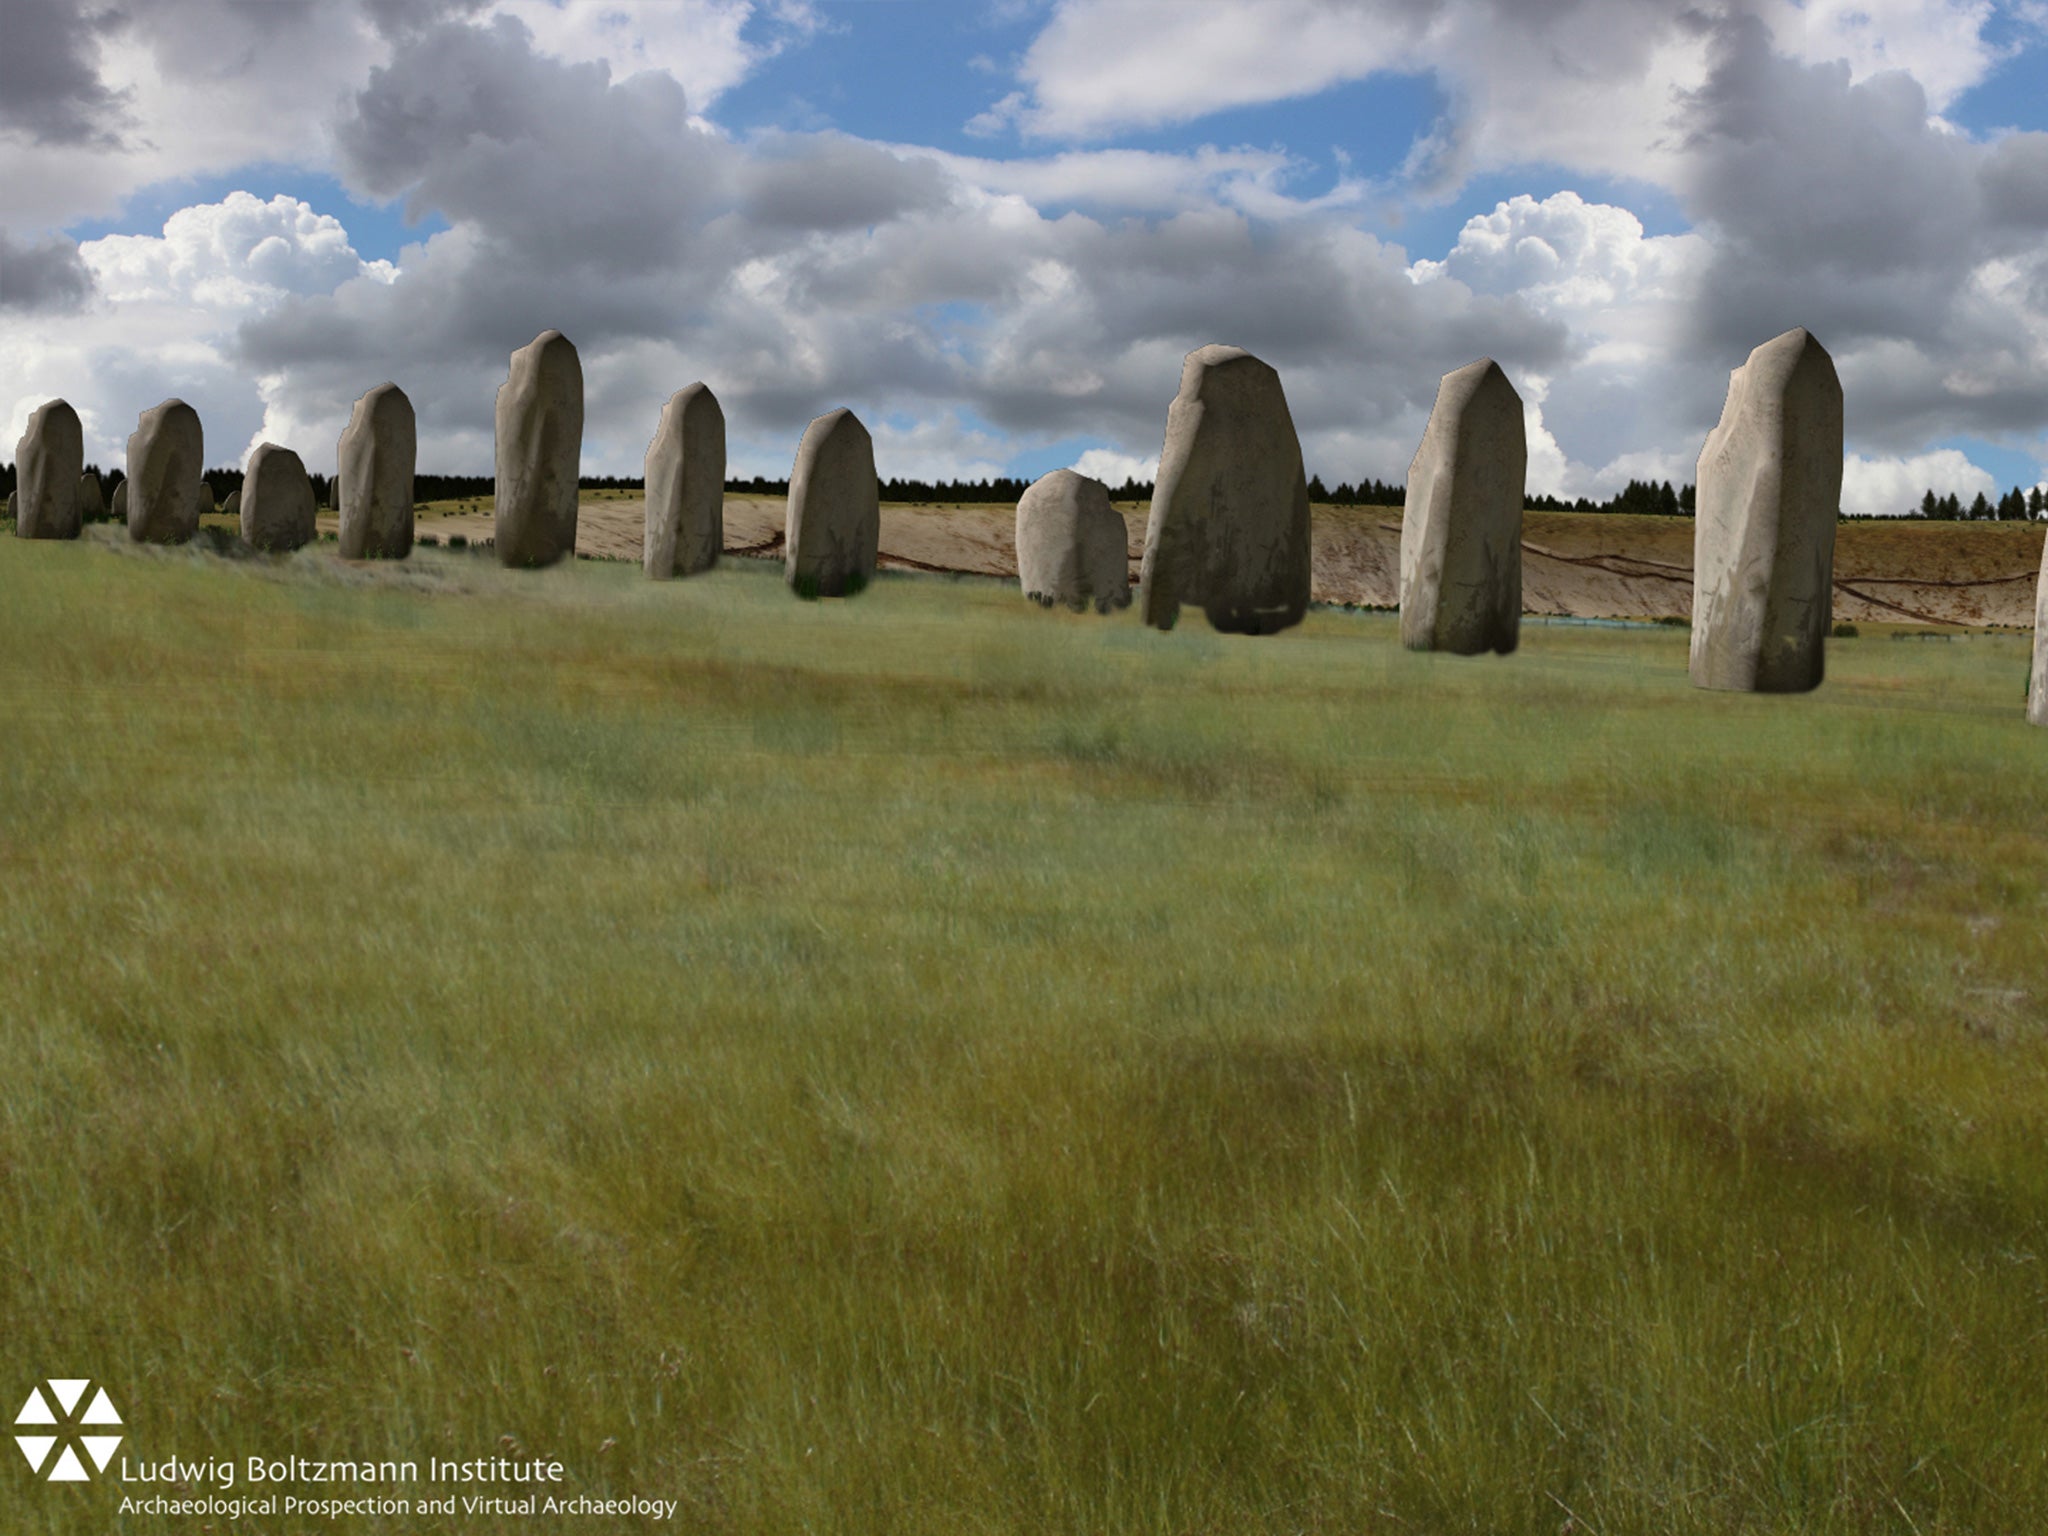 An artist’s impression of how the Durrington Walls monoliths might have looked